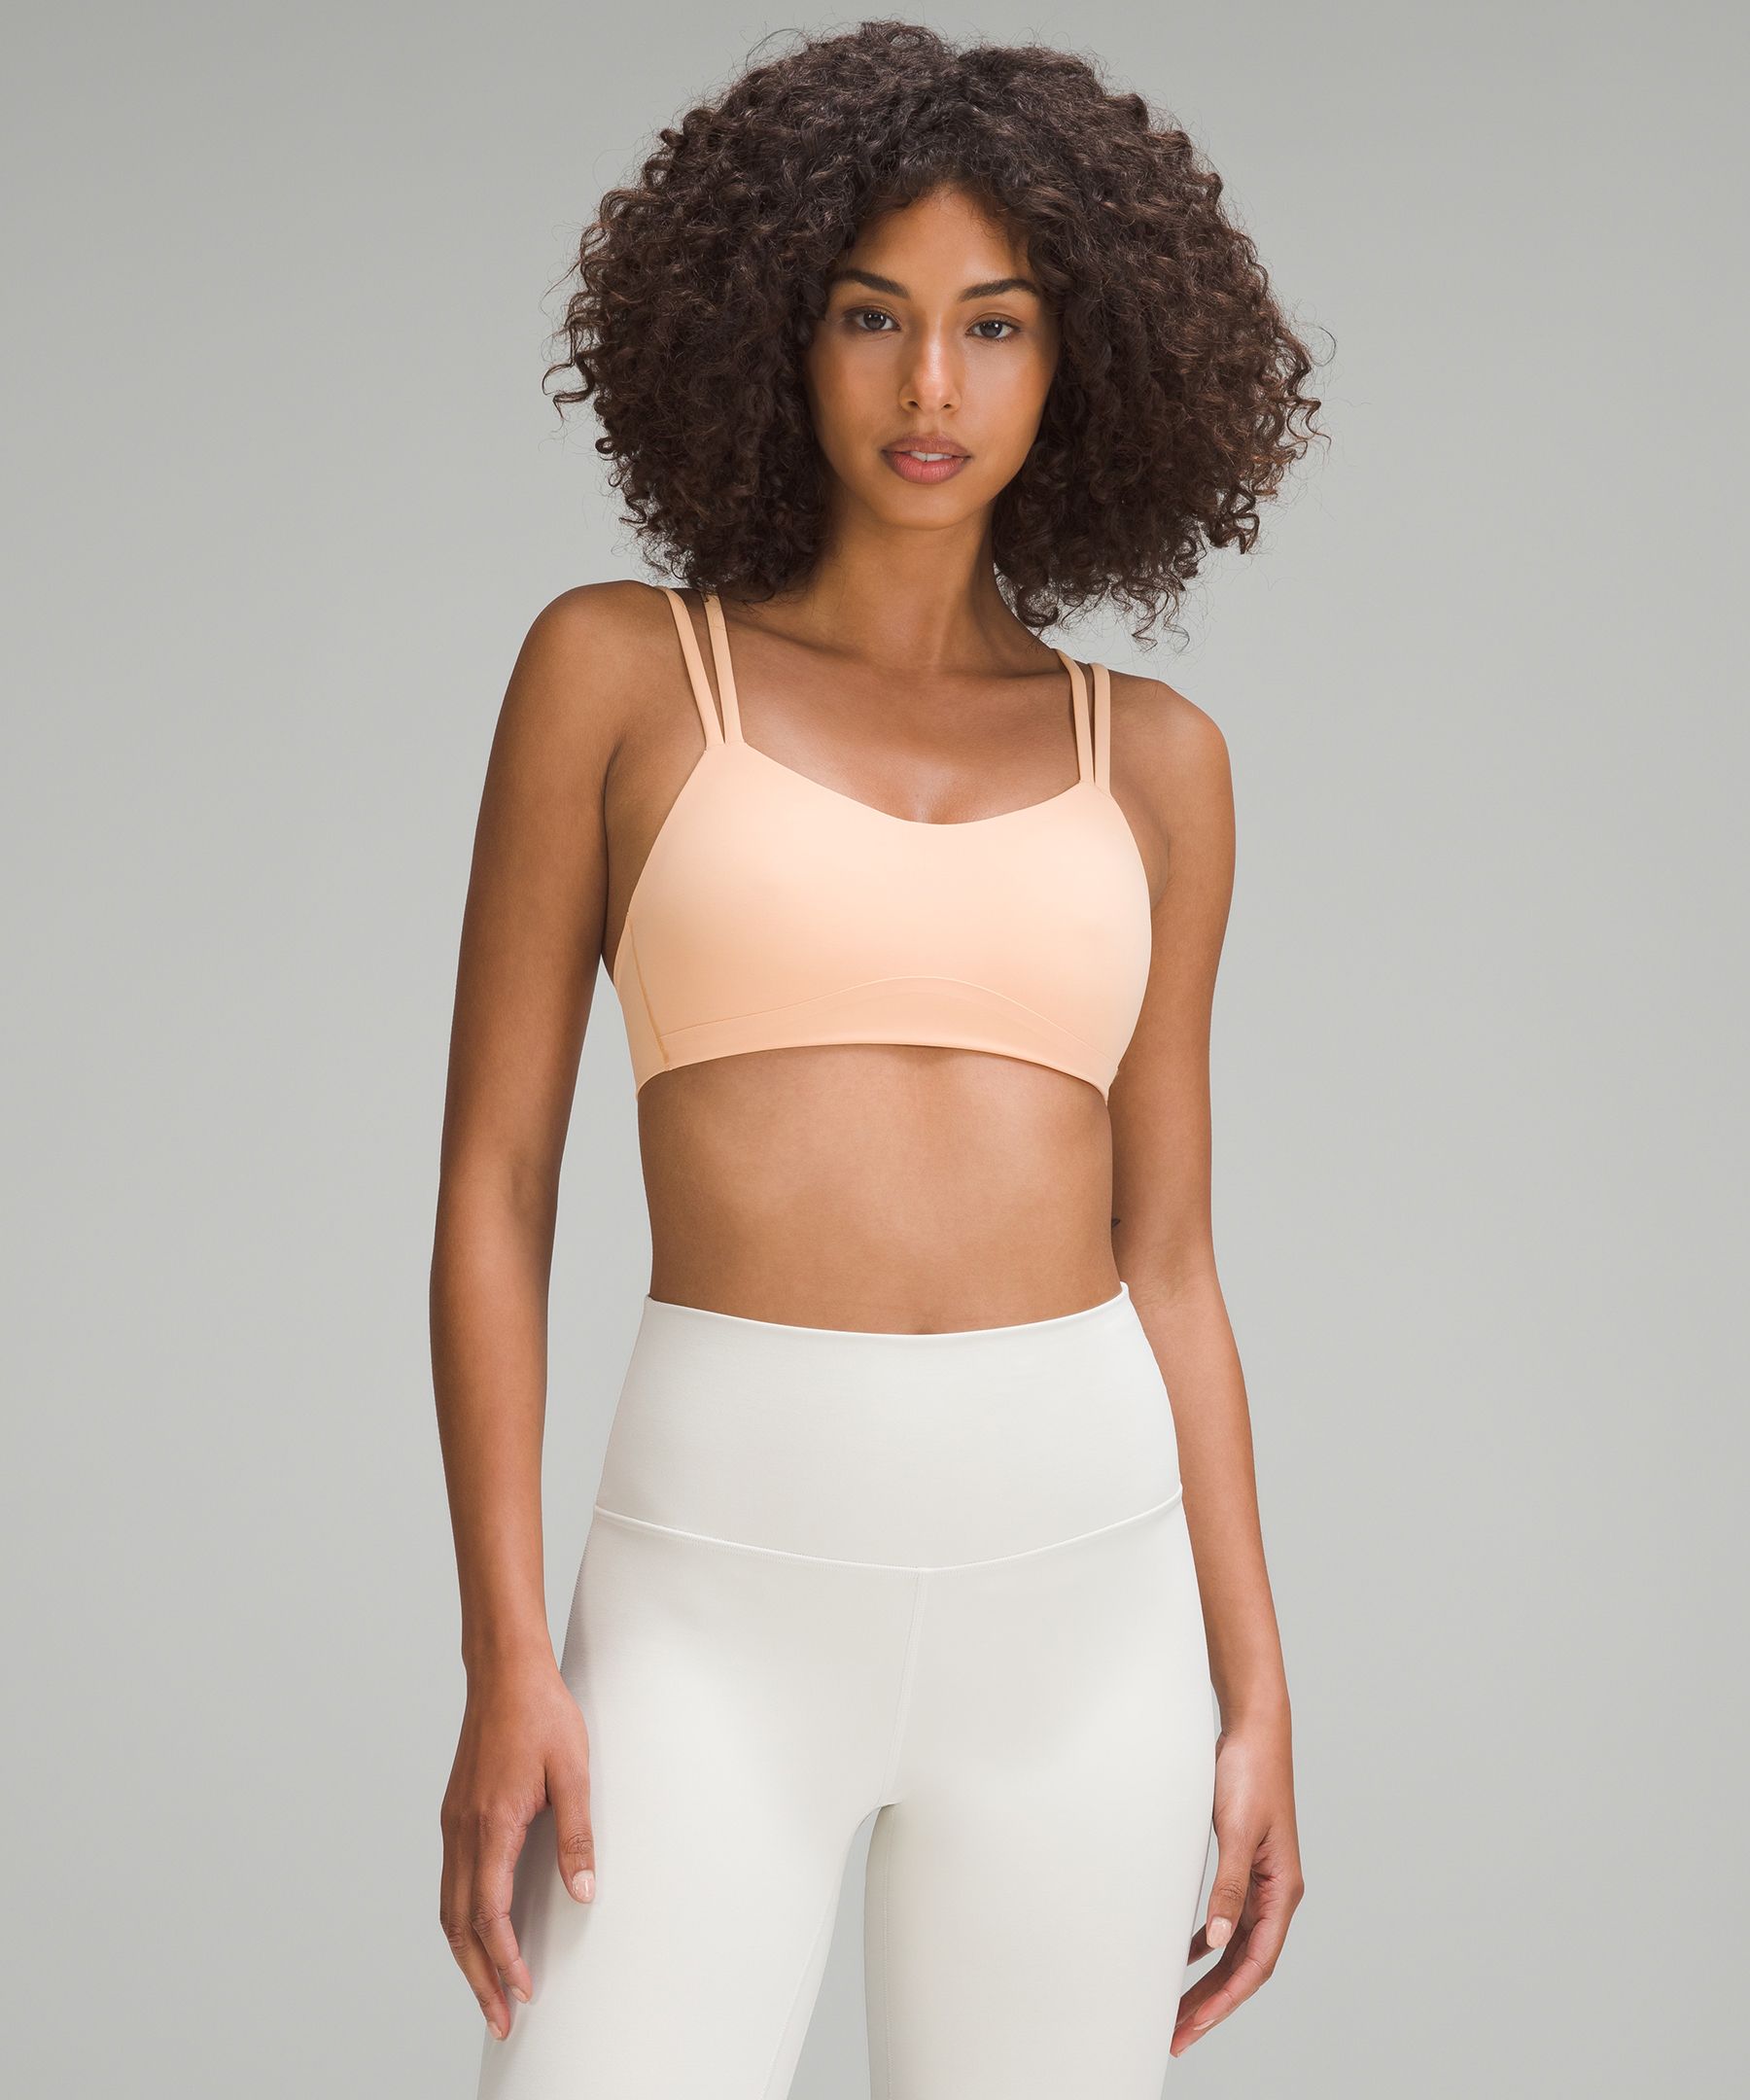 Lululemon Like A Cloud Bra Pink Size M - $52 (23% Off Retail) - From Cerrin